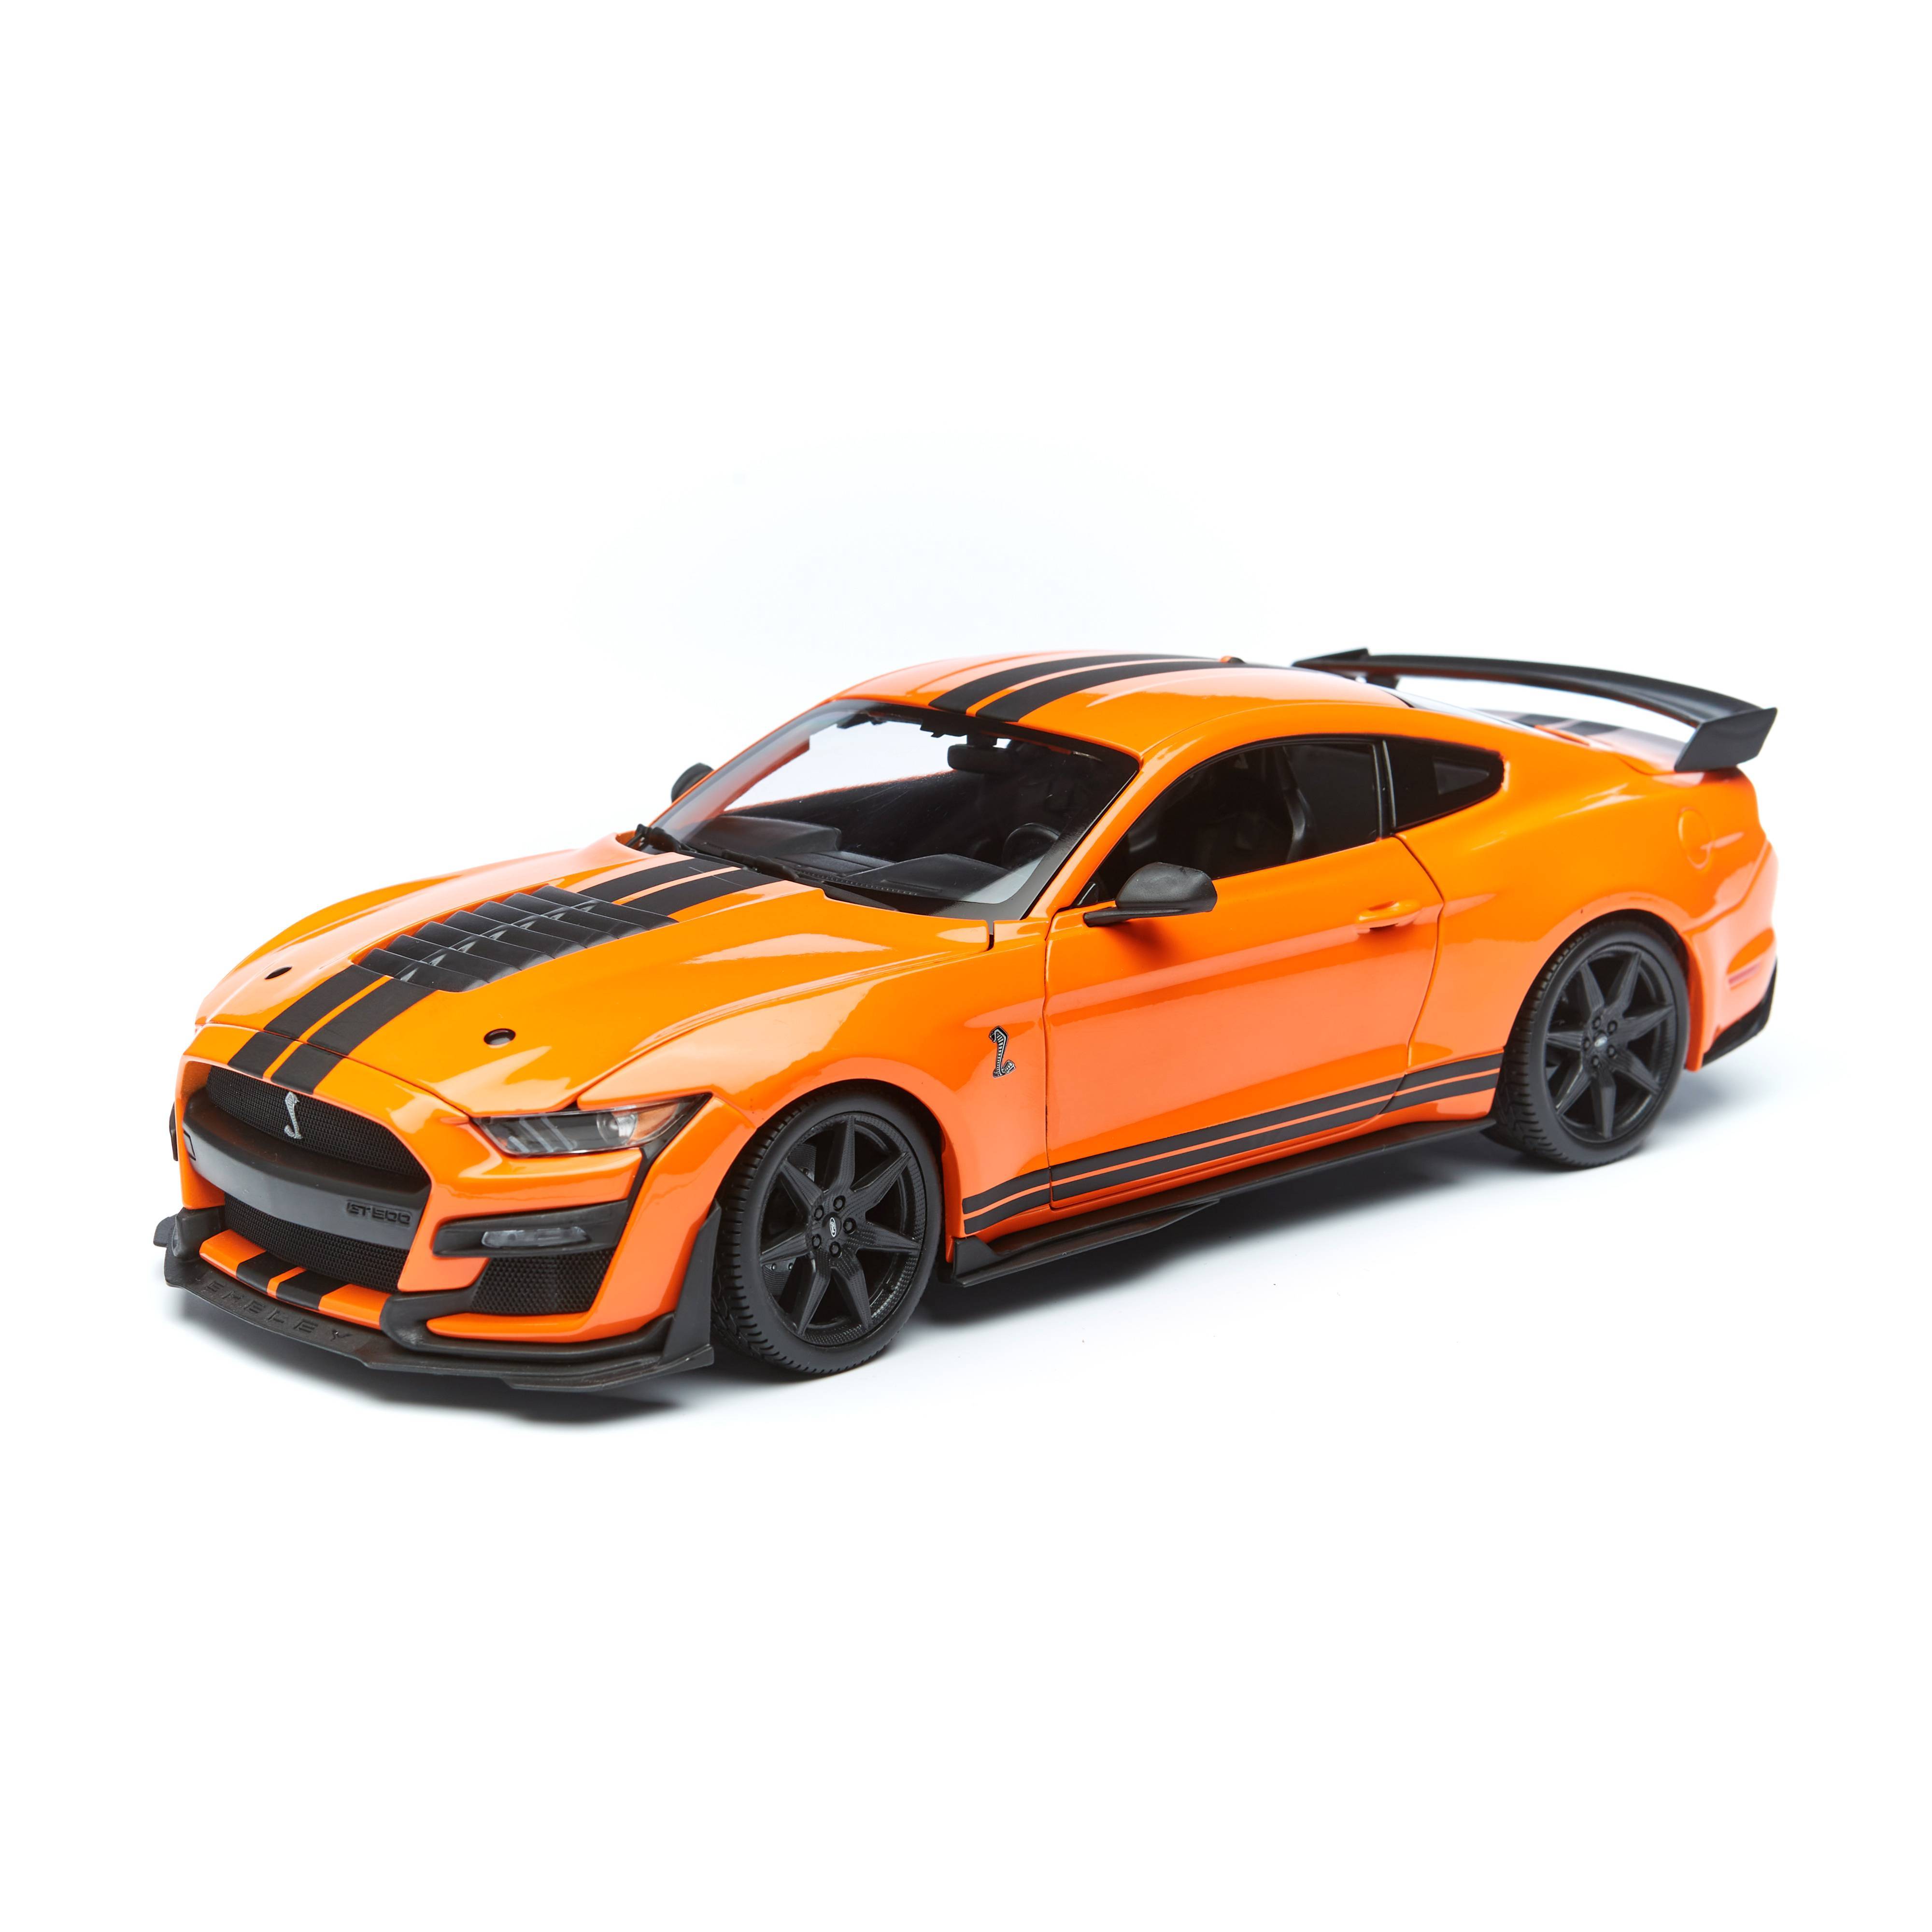 Maisto Машинка Ford Shelby GT500 2020, 1:18 оранжевая 31388 машина ford shelby mustang gt500 2020 yellow 1 18 31452